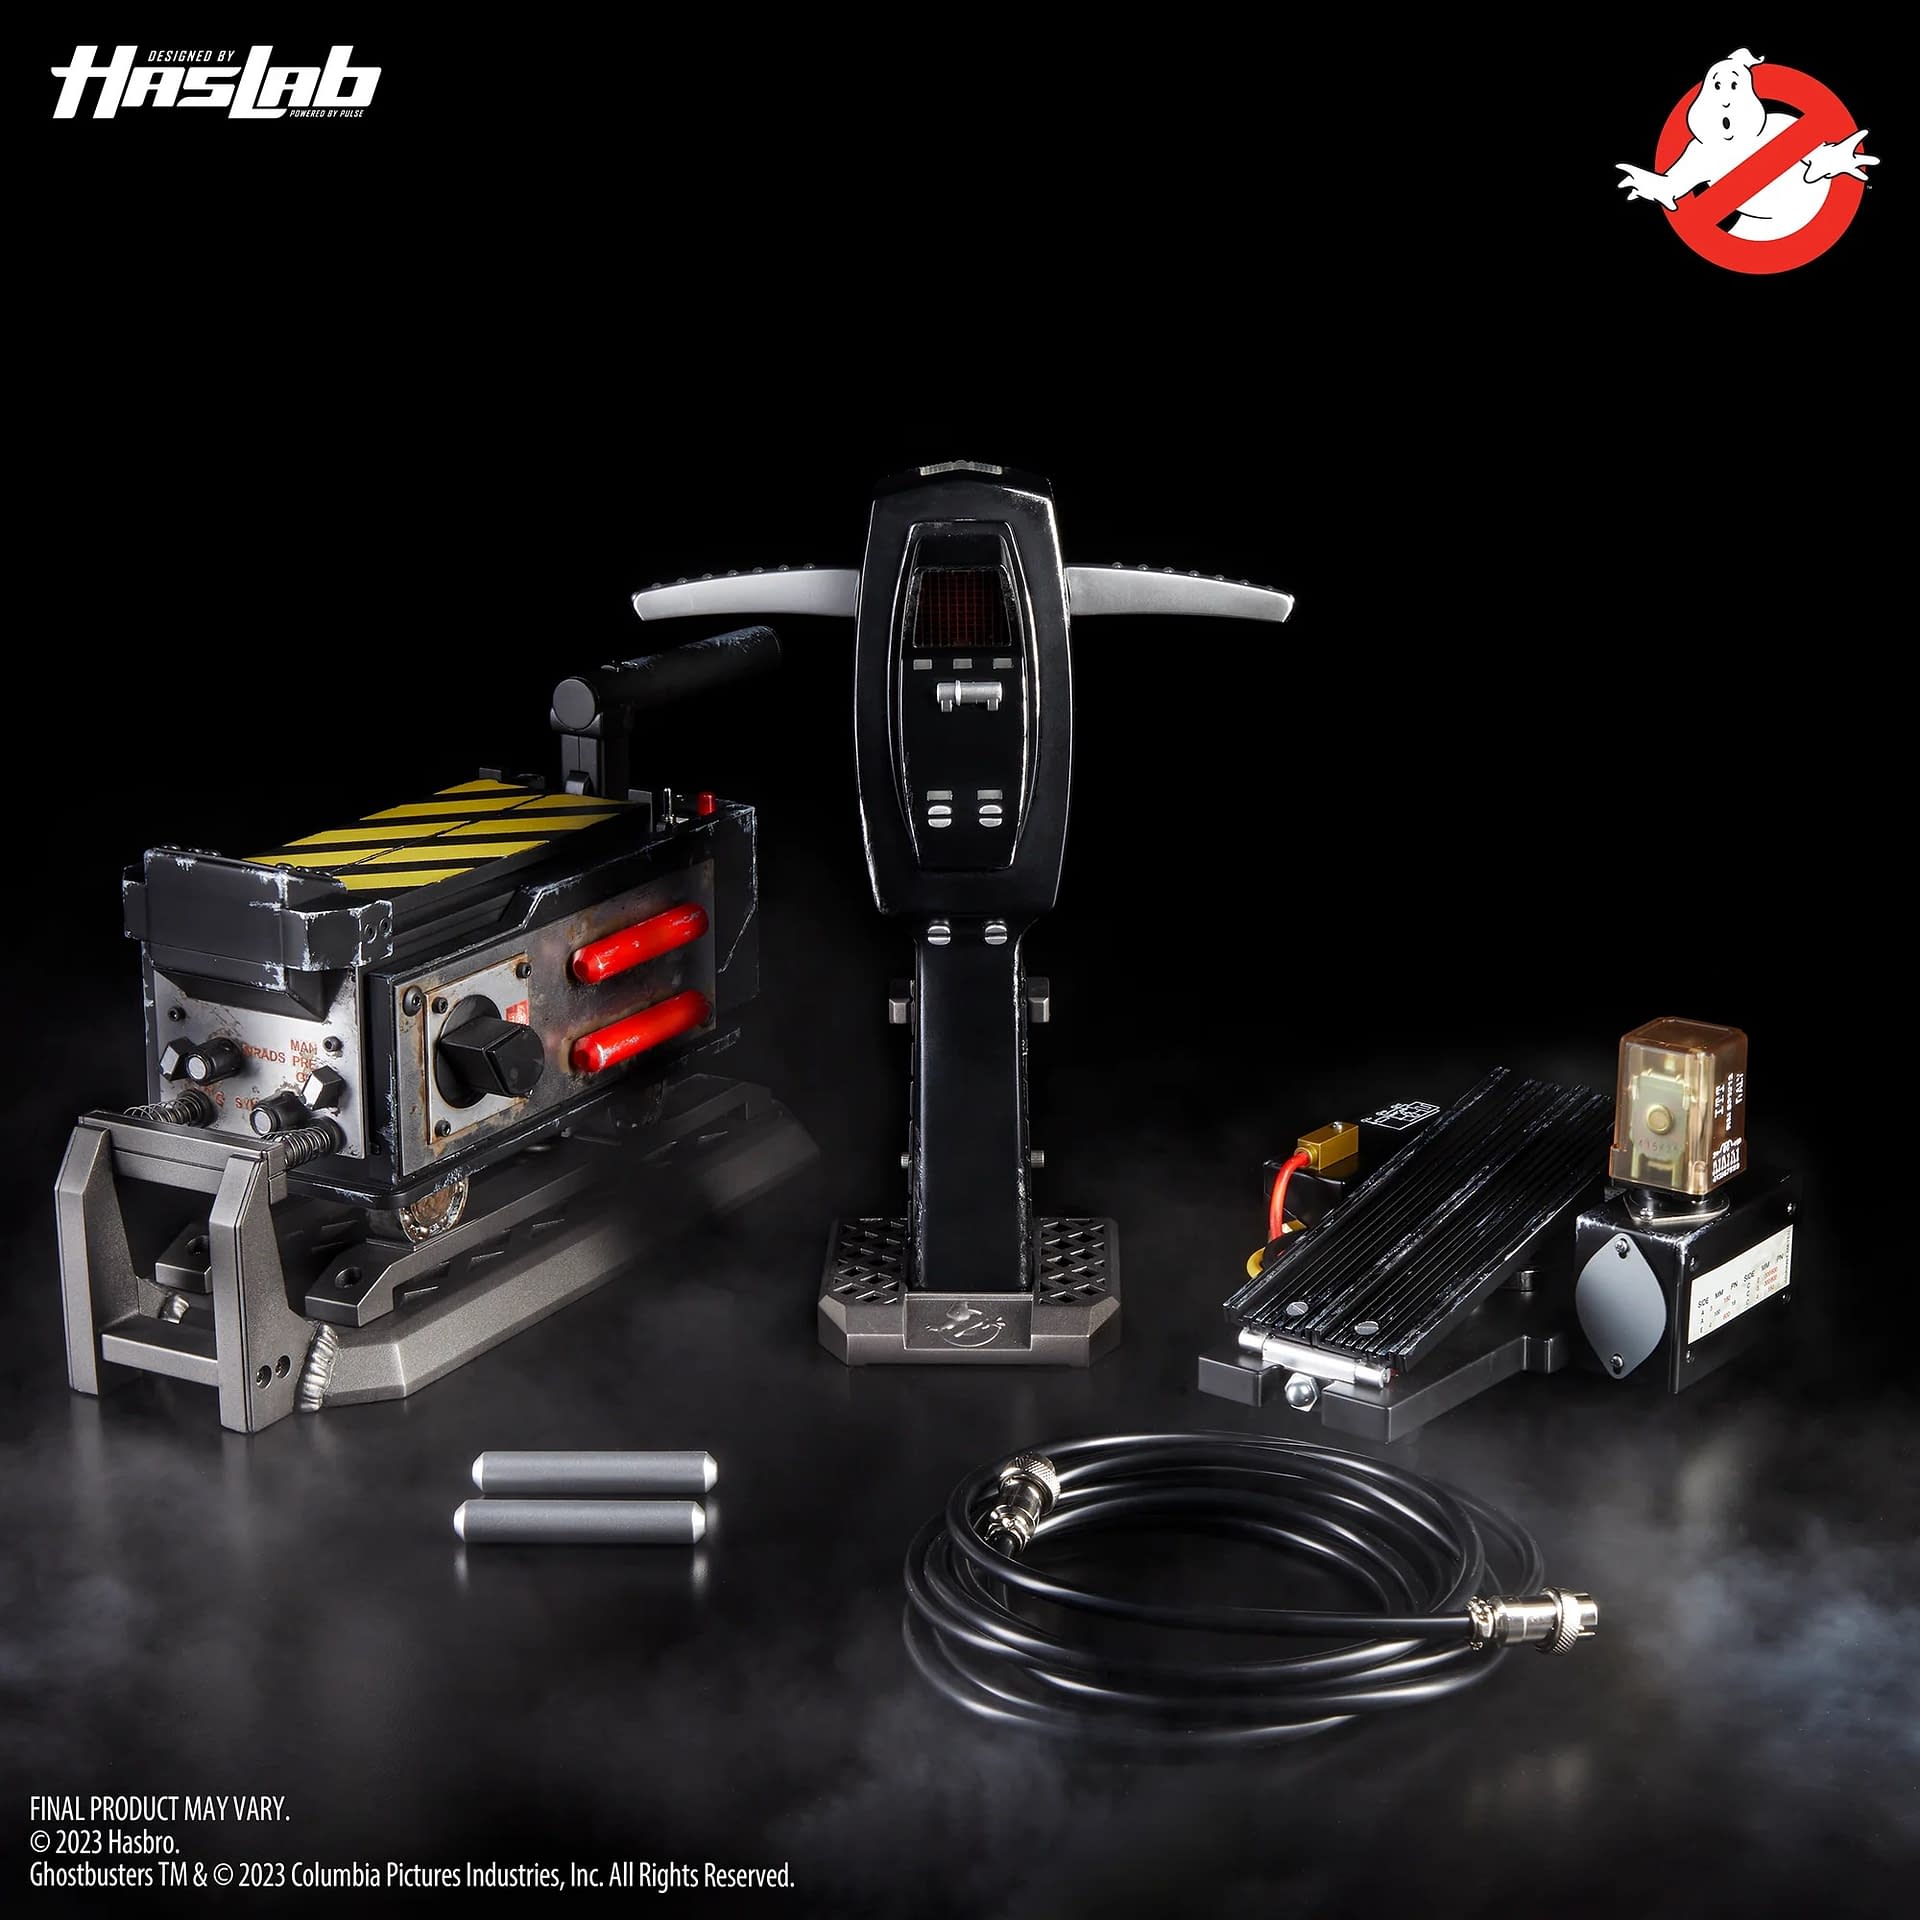 Hasbro Gets Spooky with Ghostbusters Plasma Series HasLab Two!